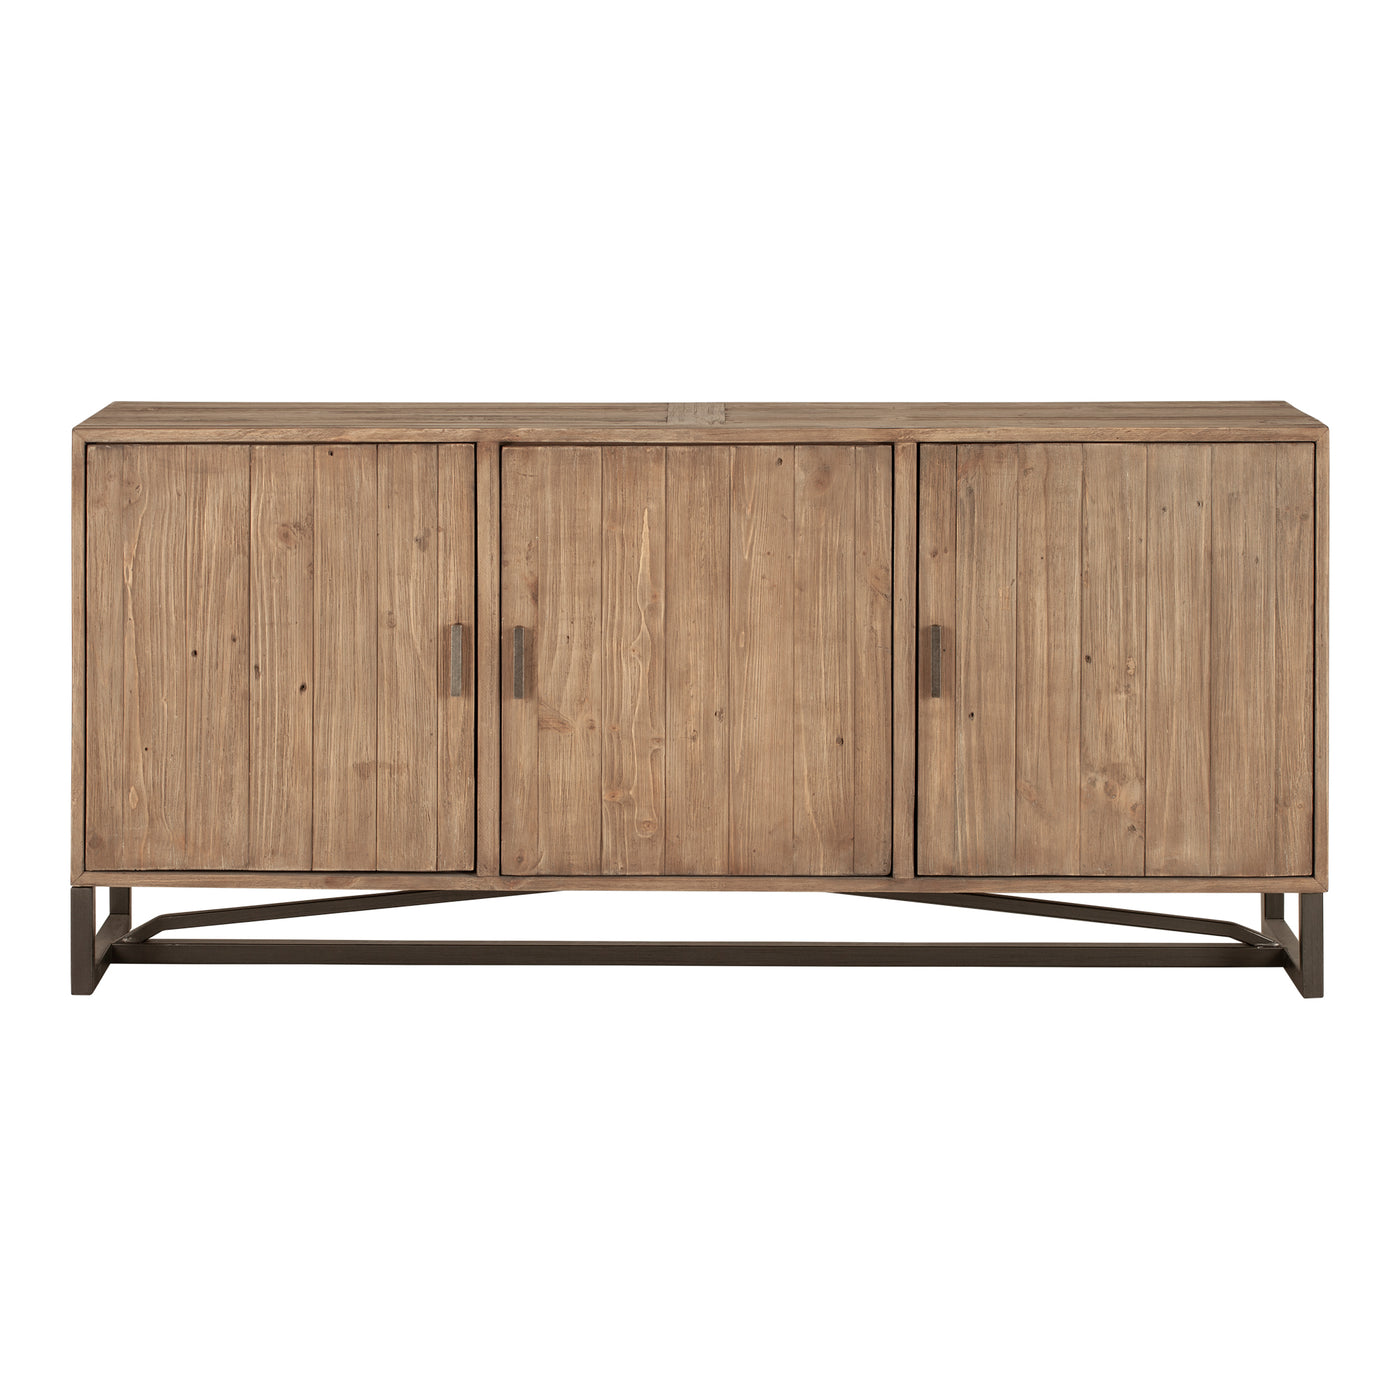 Made with solid reclaimed pine, the Sierra Sideboard exhibits natural woodgrain and knot variances.  Its six shelves provi...